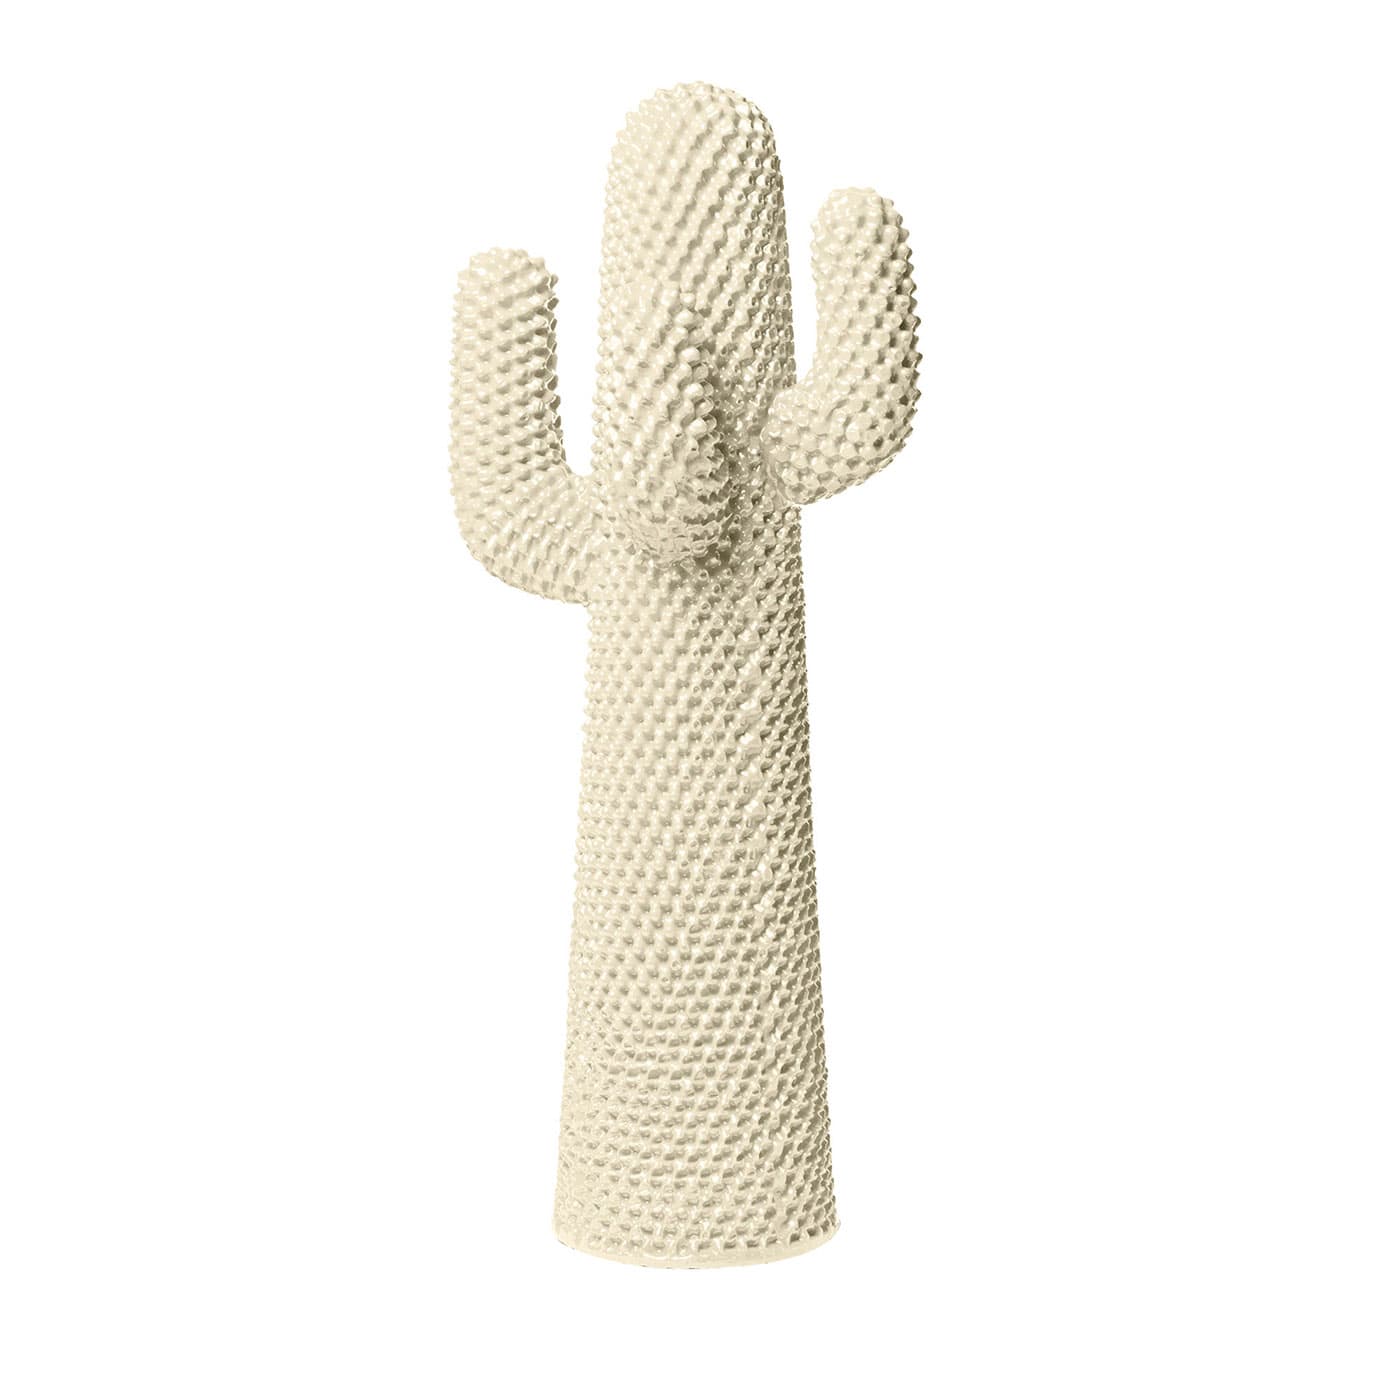 Another White Cactus Coat Stand by Drocco/Mello - Gufram